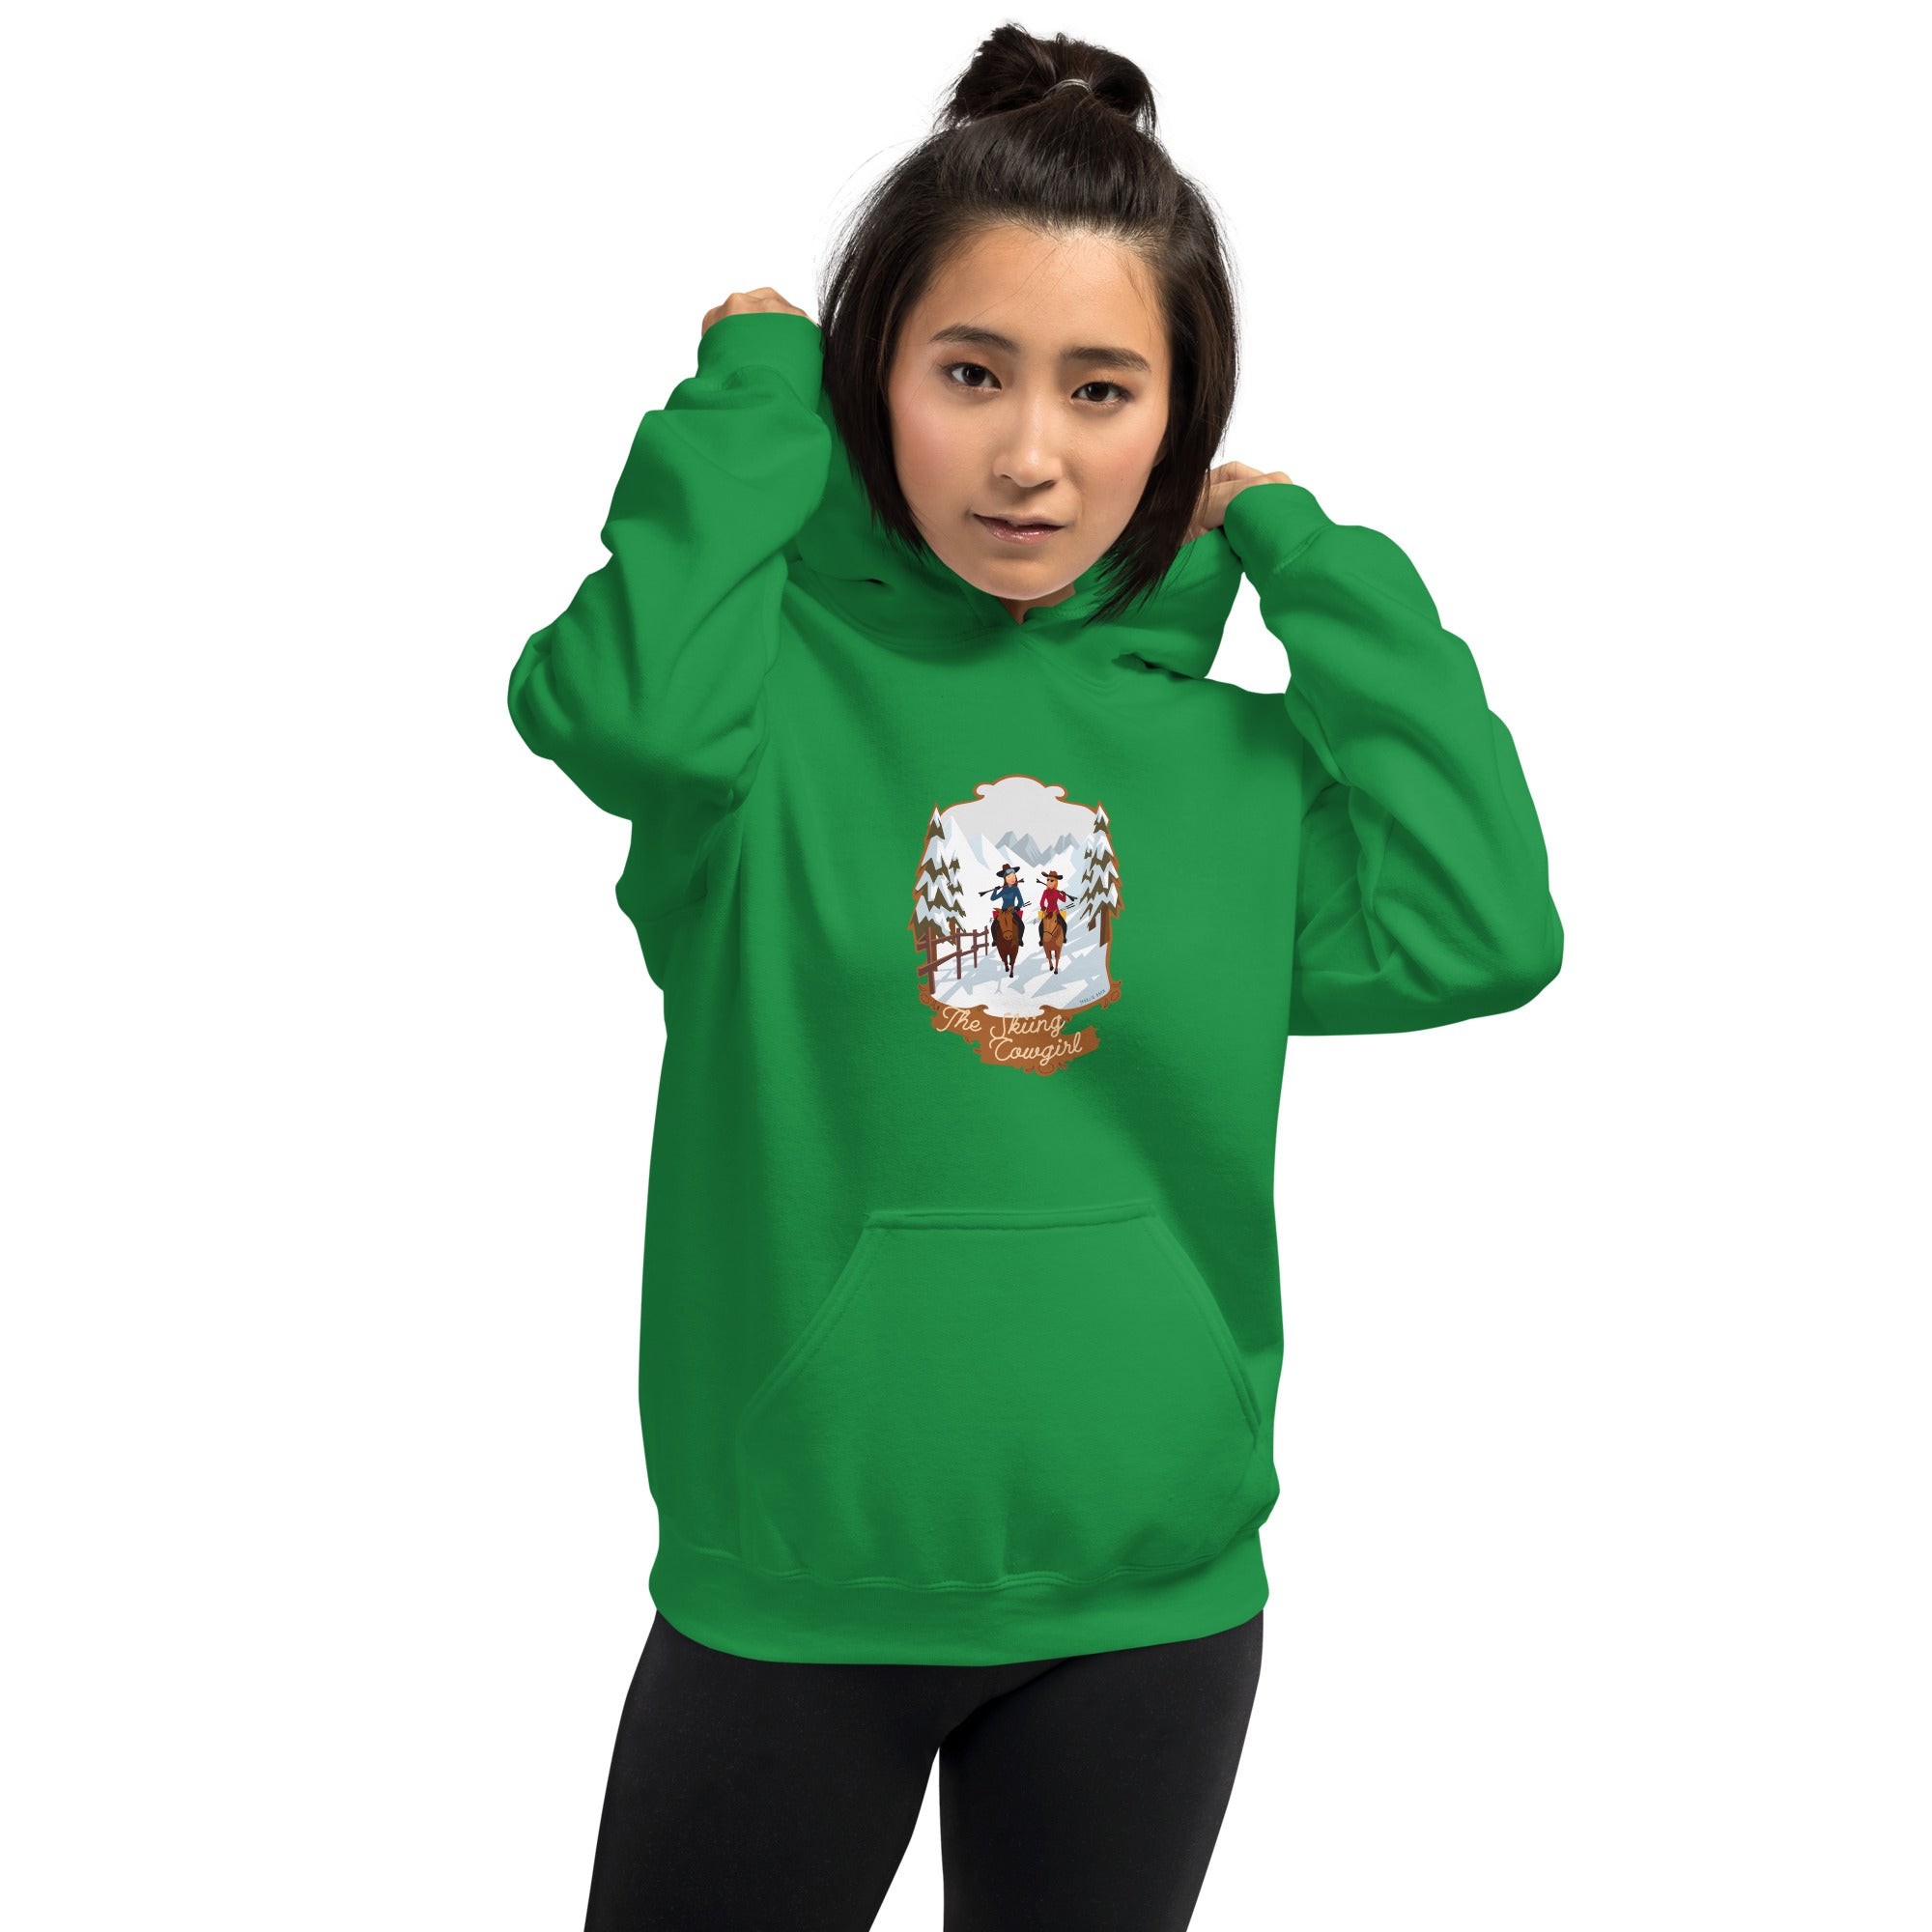 Unisex Hoodie The Skiing Cowgirl on bright colors